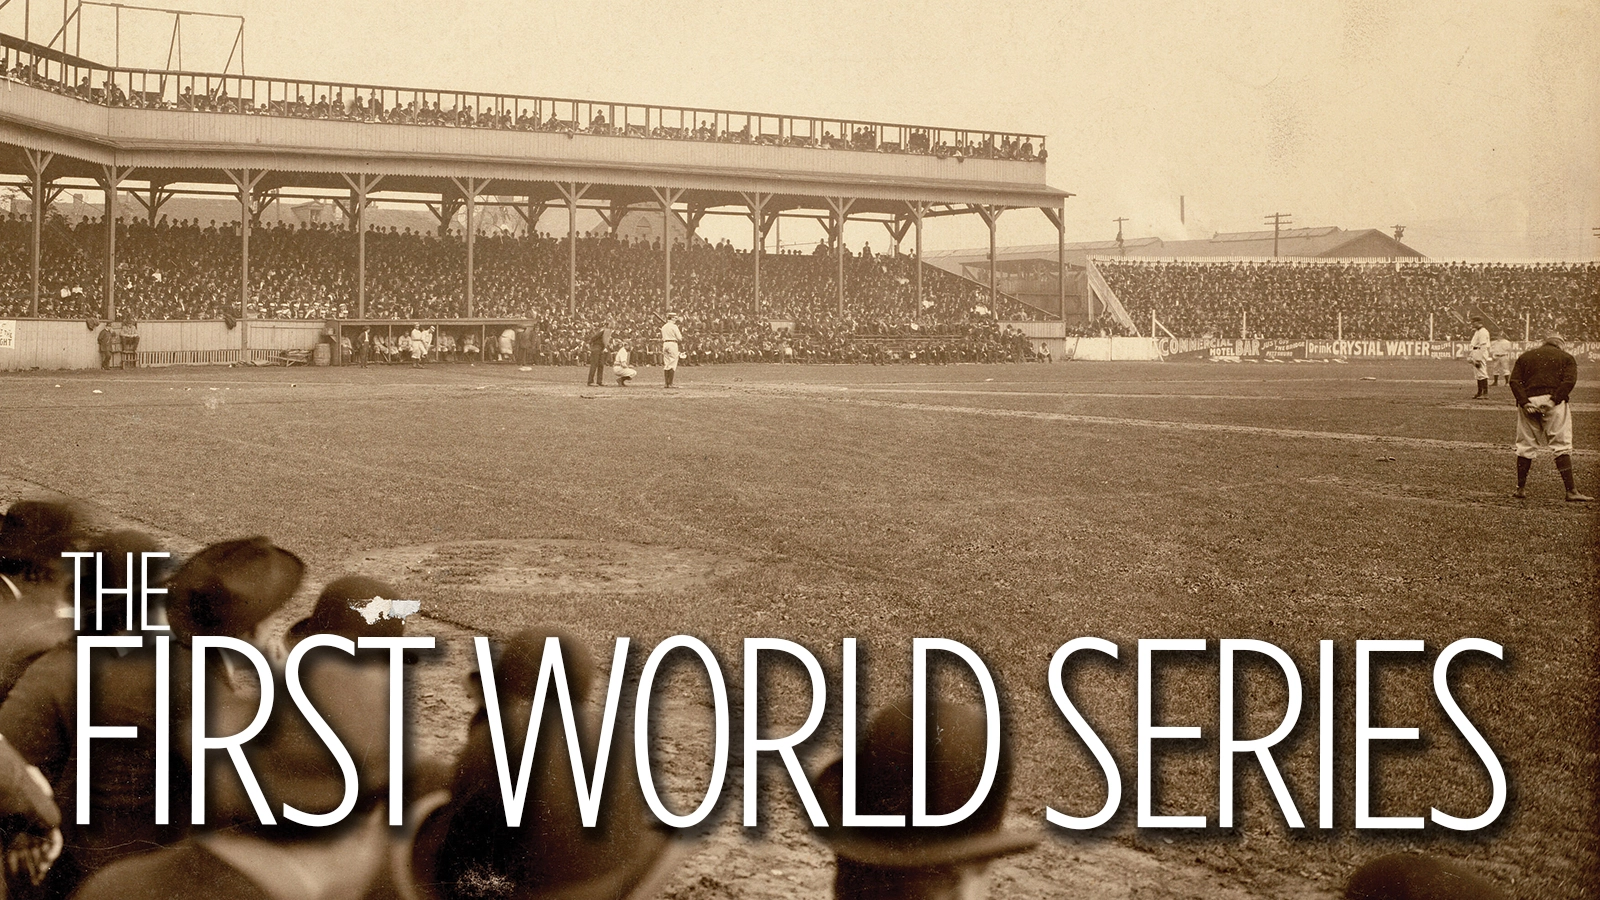 A dated photo of the first world series stadium, alongside the article headline